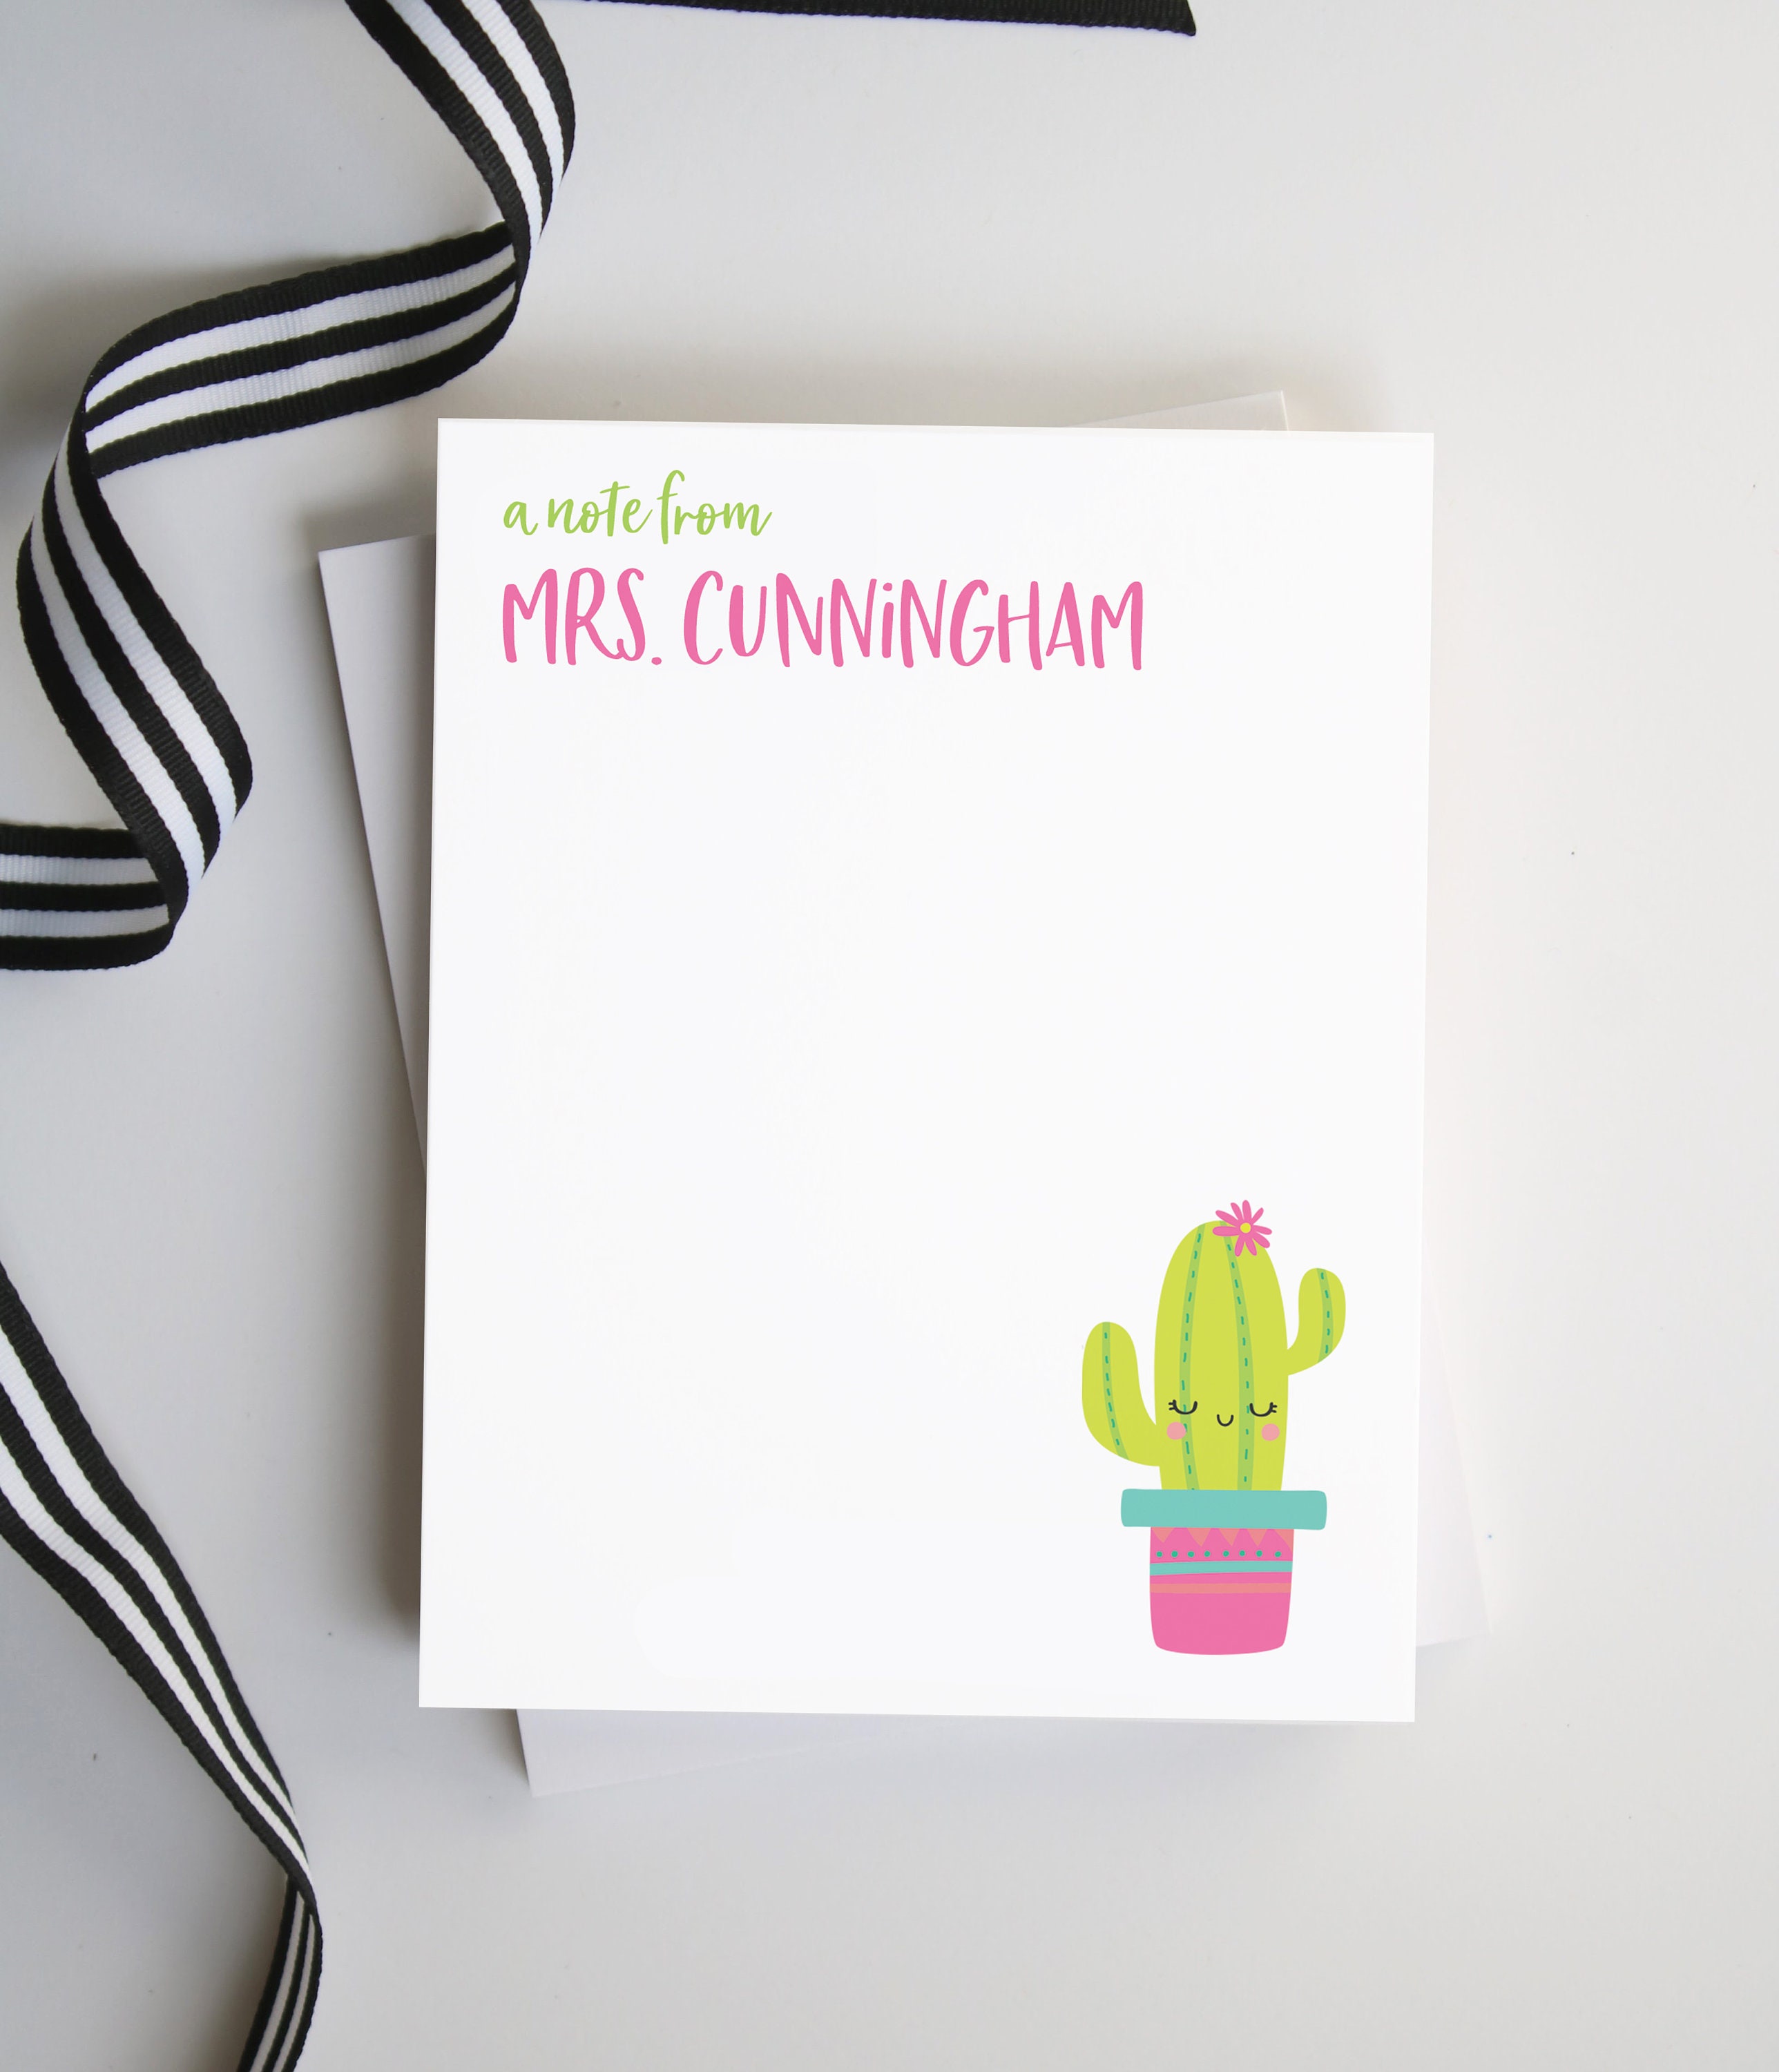 personalized stationery, stationary . cactus, cacti note cards, watercolor  succulents notecards . FLAT stationery . set of 12